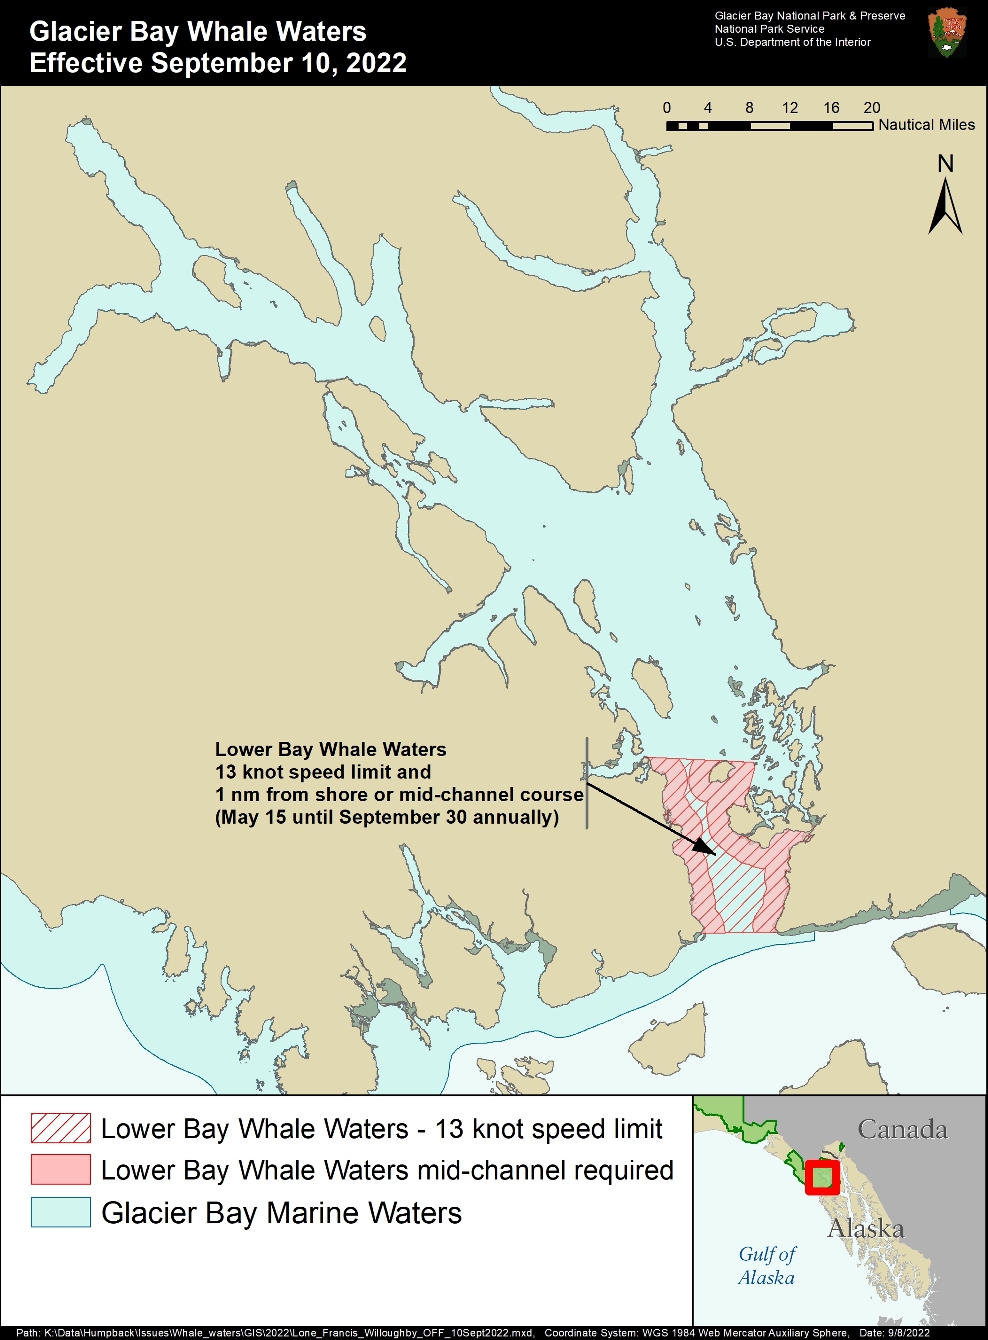 Whale waters map shows glacier bay and affected areas. Contact the park for precise details 907-697-2230